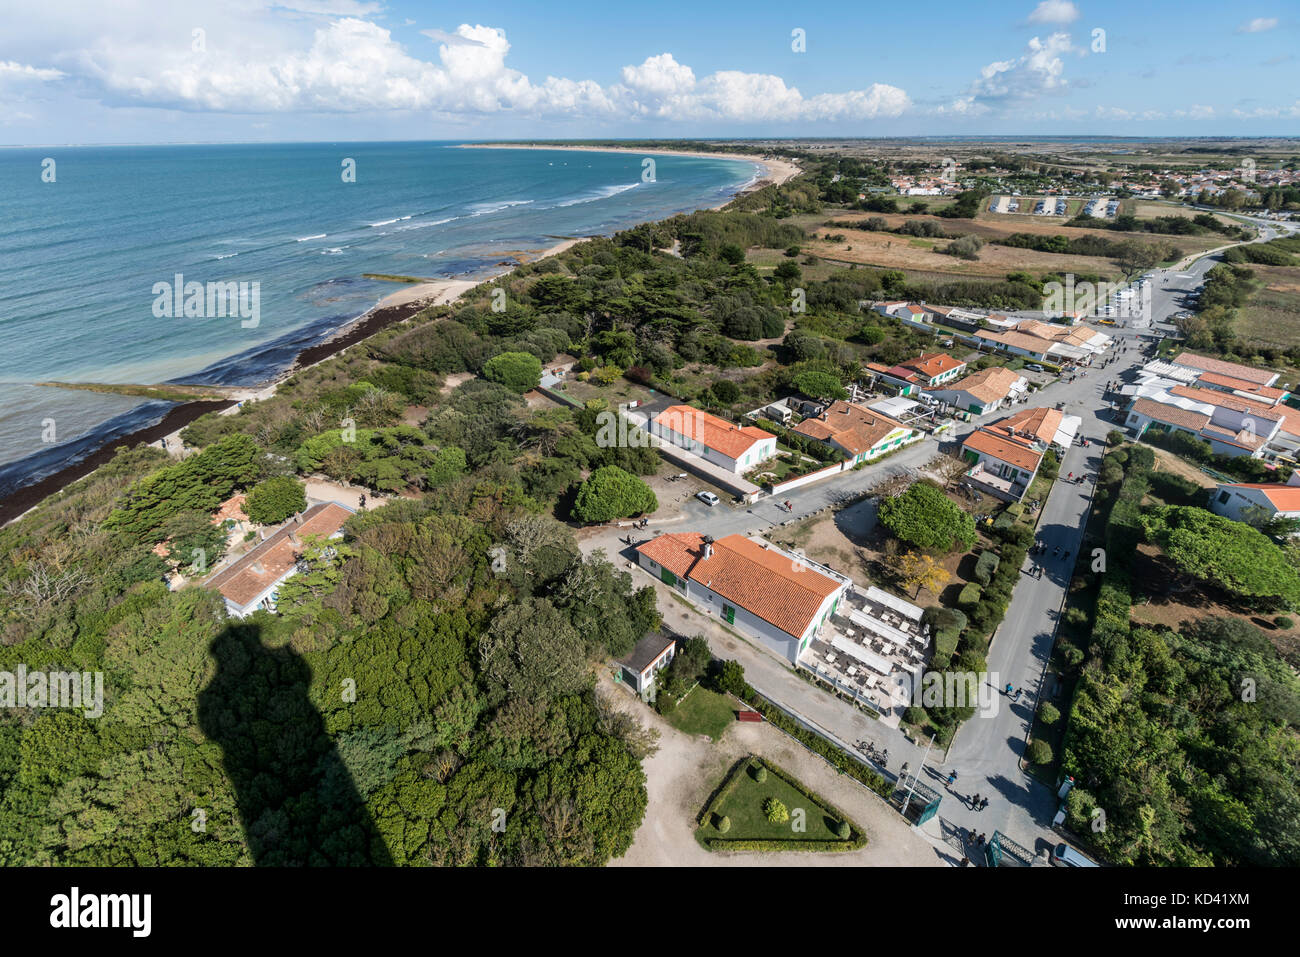 Pnoramic view from Phare des Baleines, lighthouse, Ile de Re, Nouvelle-Aquitaine, french westcoast, france, Stock Photo